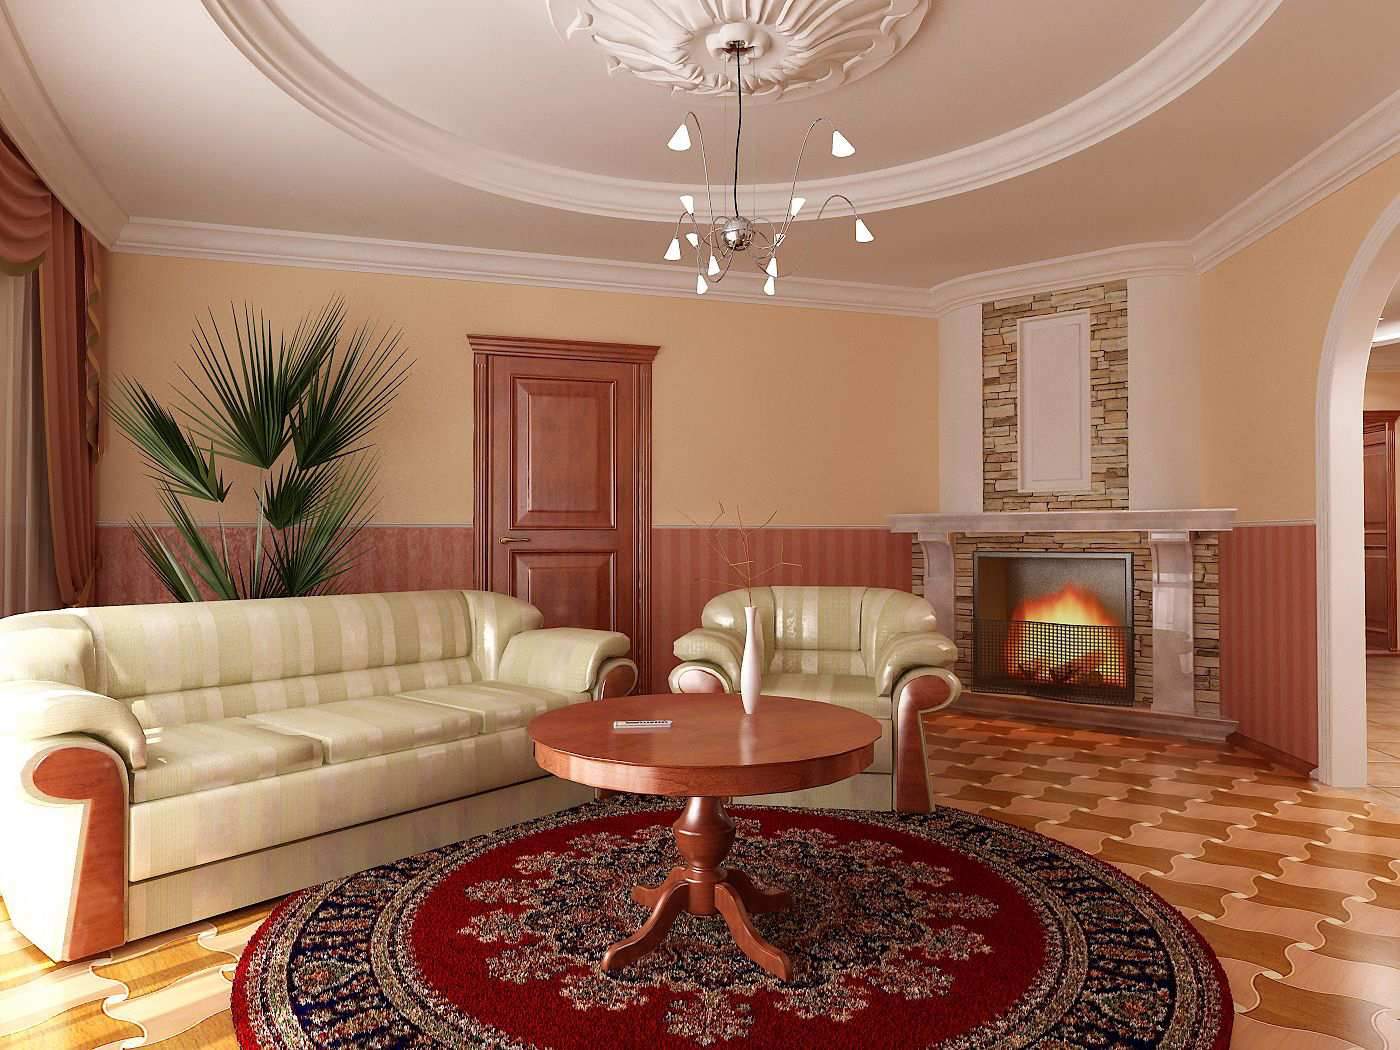 Living Room With Stylish Living Room Decor Ideas With Unique Chandelier And Brown Round Table On Circle Rug Completed With Sofa And Chairs Plus Furnished With Green Plant Decoration Living Room The Best Living Room Decor Ideas That You Can Fix By Yourself